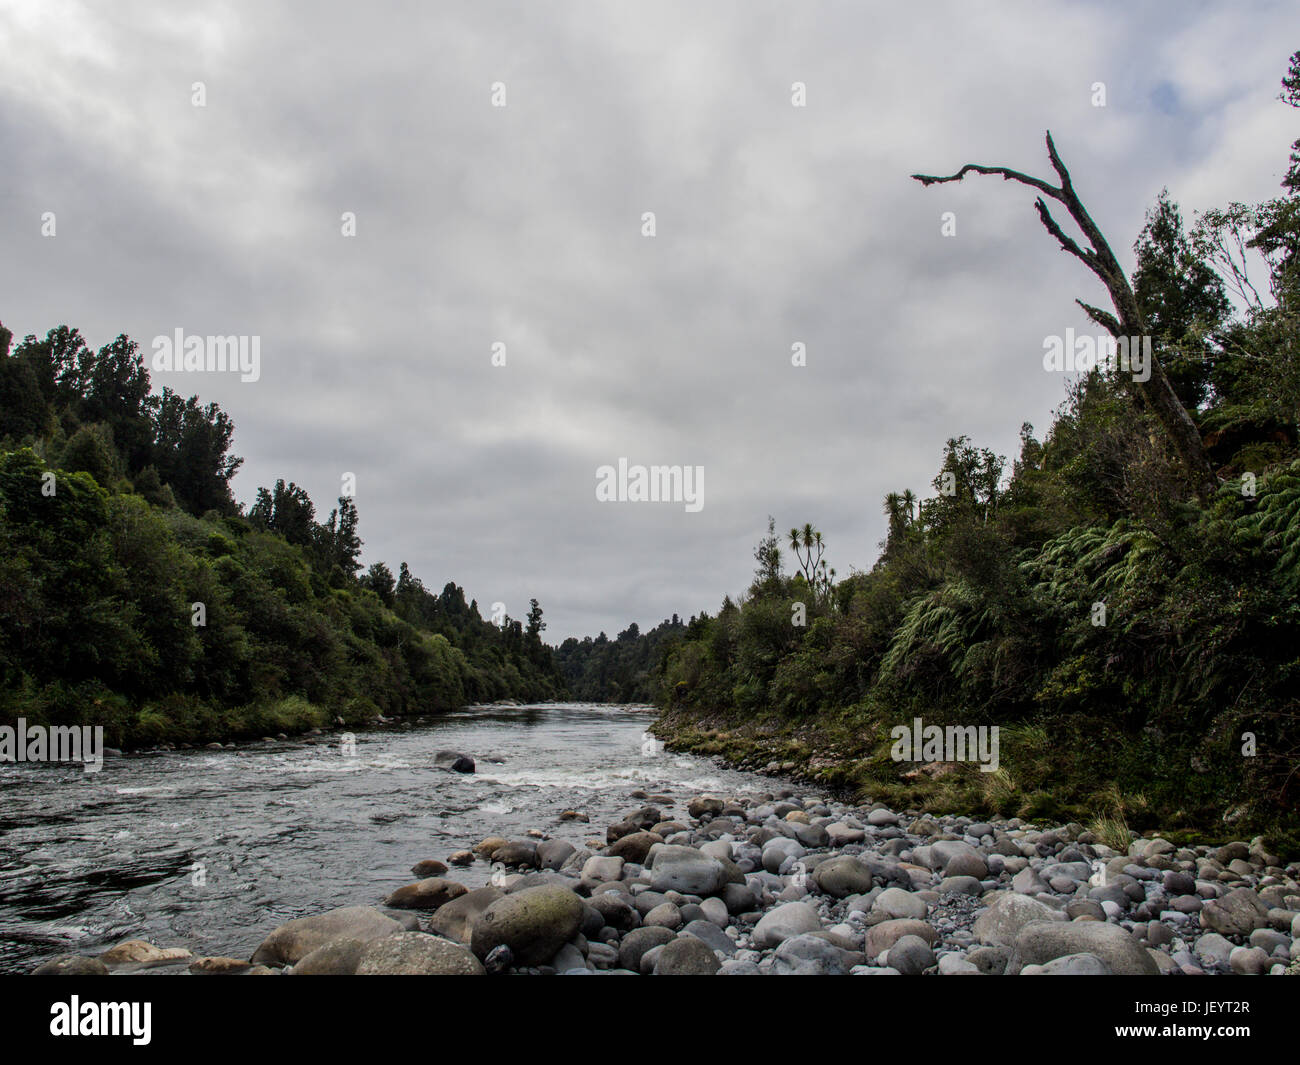 Whakapapa River at Owhango. Flowing in boulder bed through native forest on steep slopes of river gorge, Tongariro Forest, Ruapehu Distict, New Zealan Stock Photo